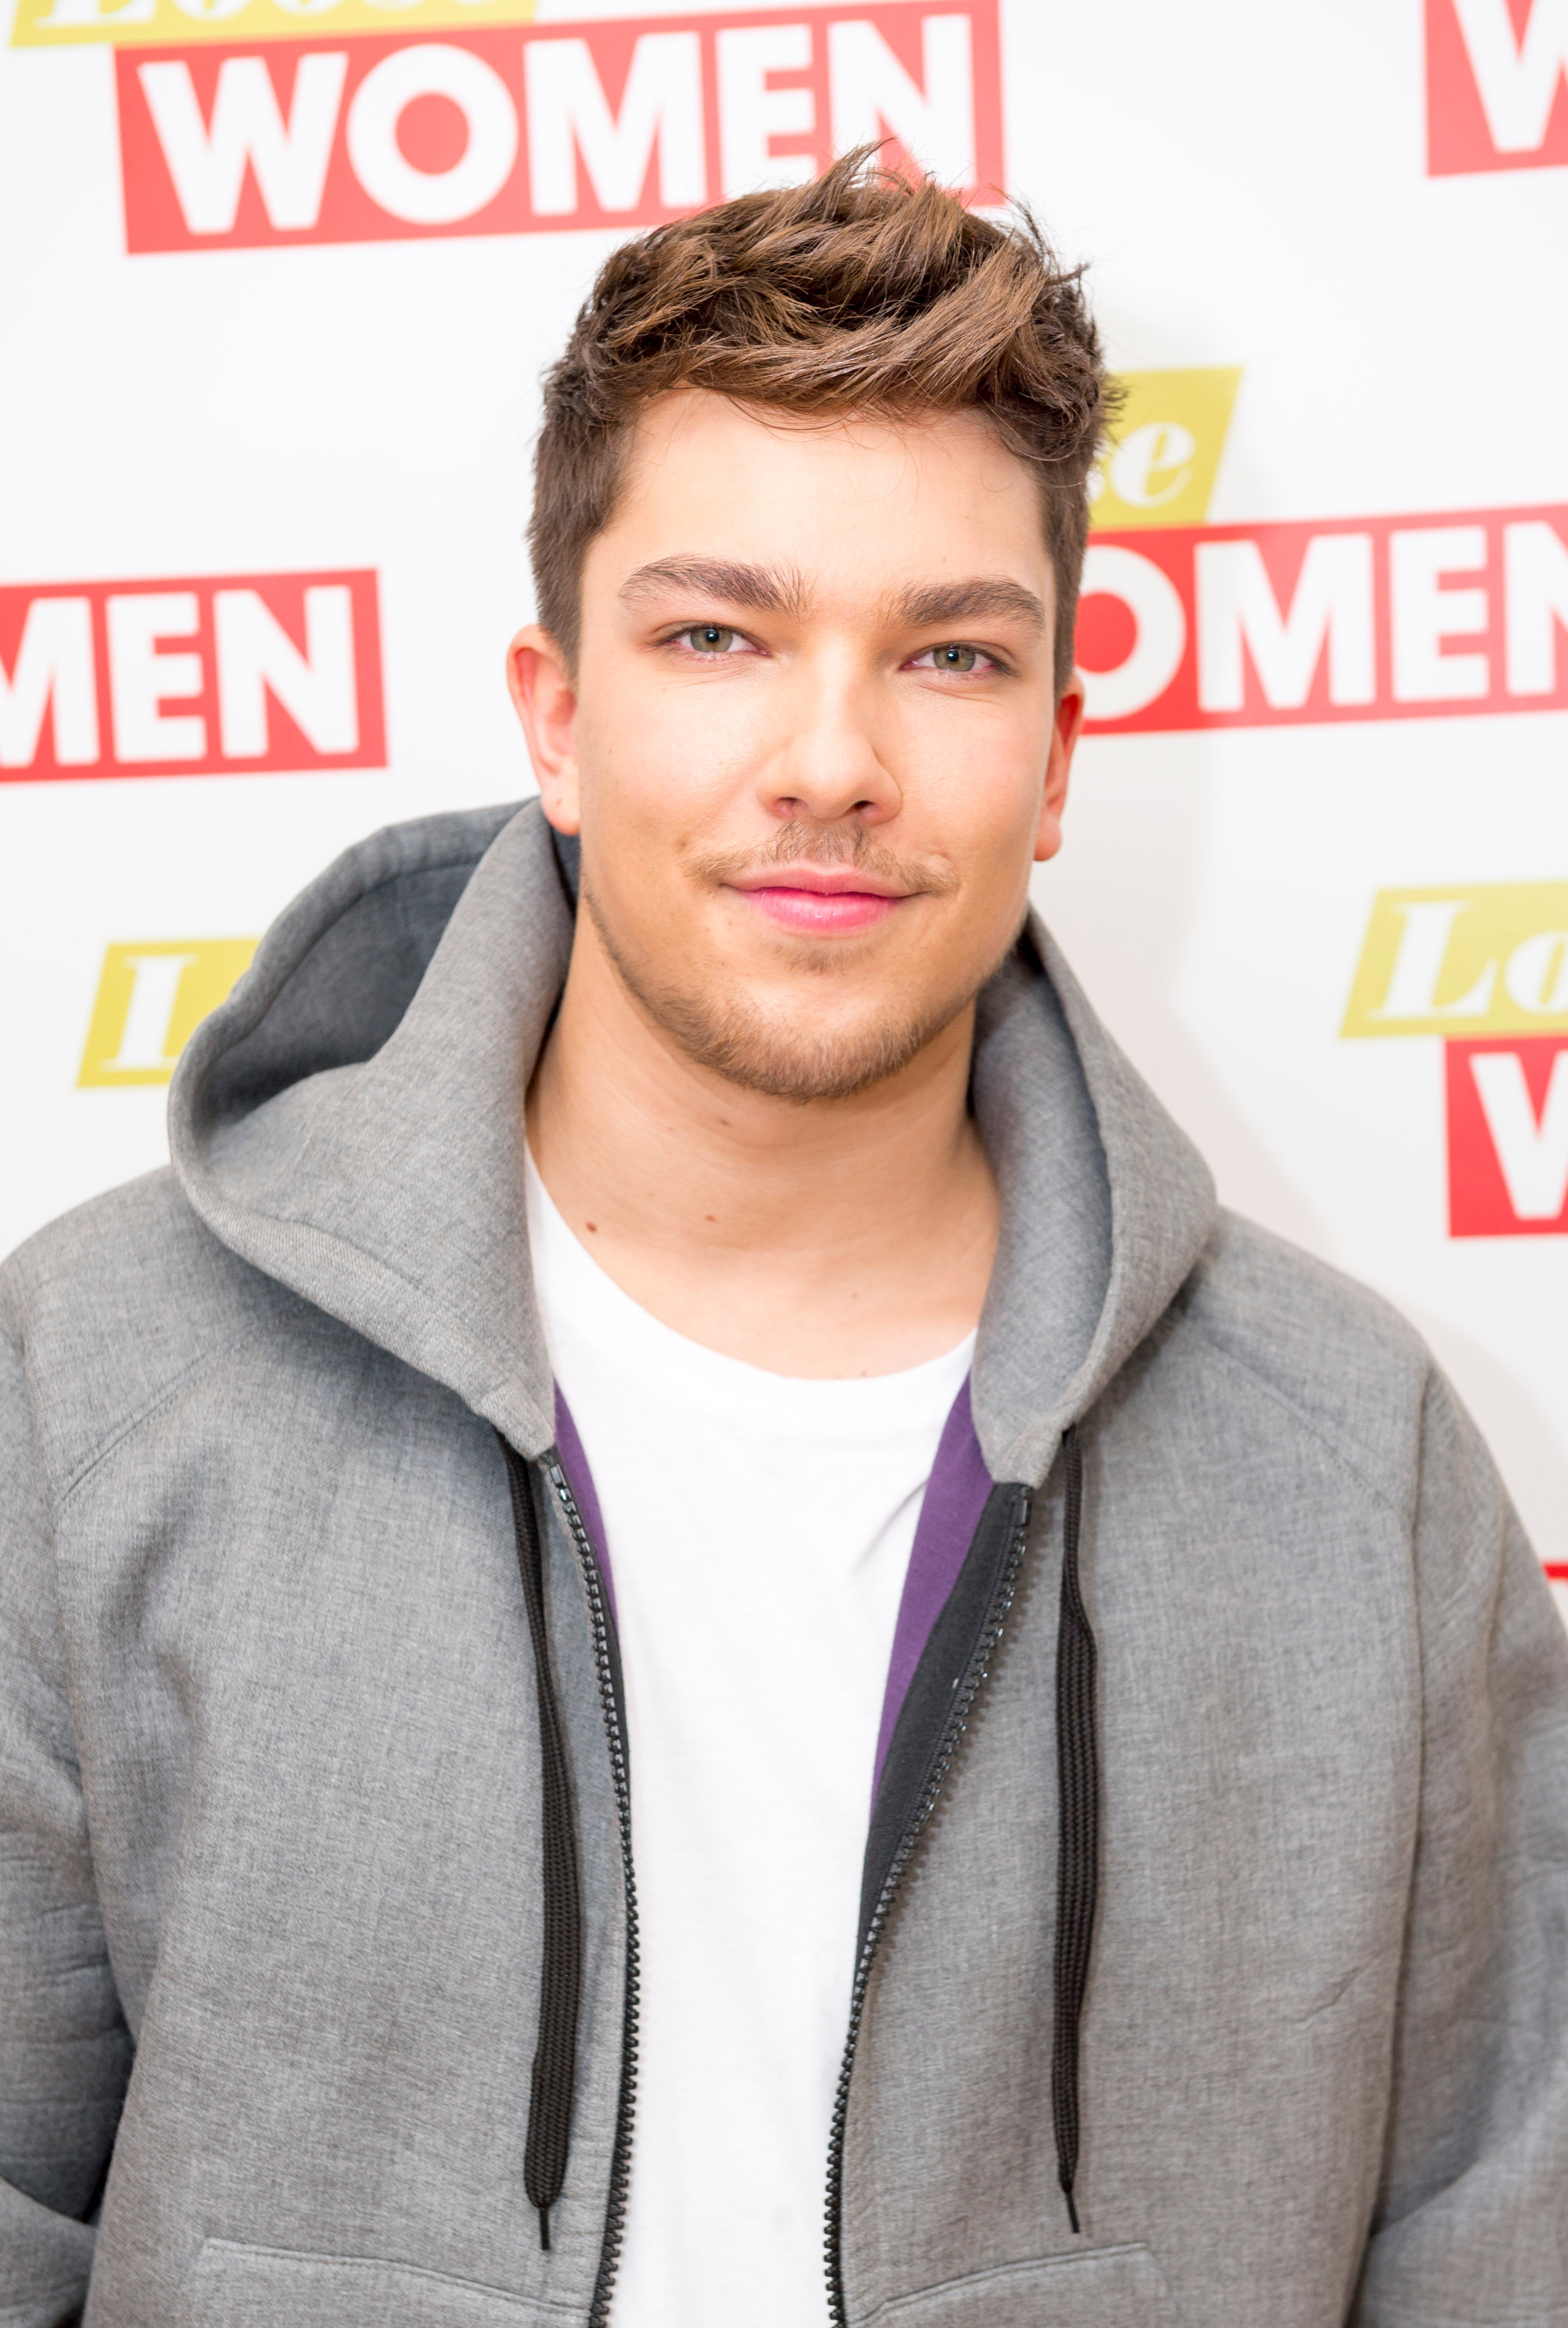 Matt Terry, who won the 2016 series of the ITV show, said he felt he had to stay in the closet for years and had a secret boyfriend